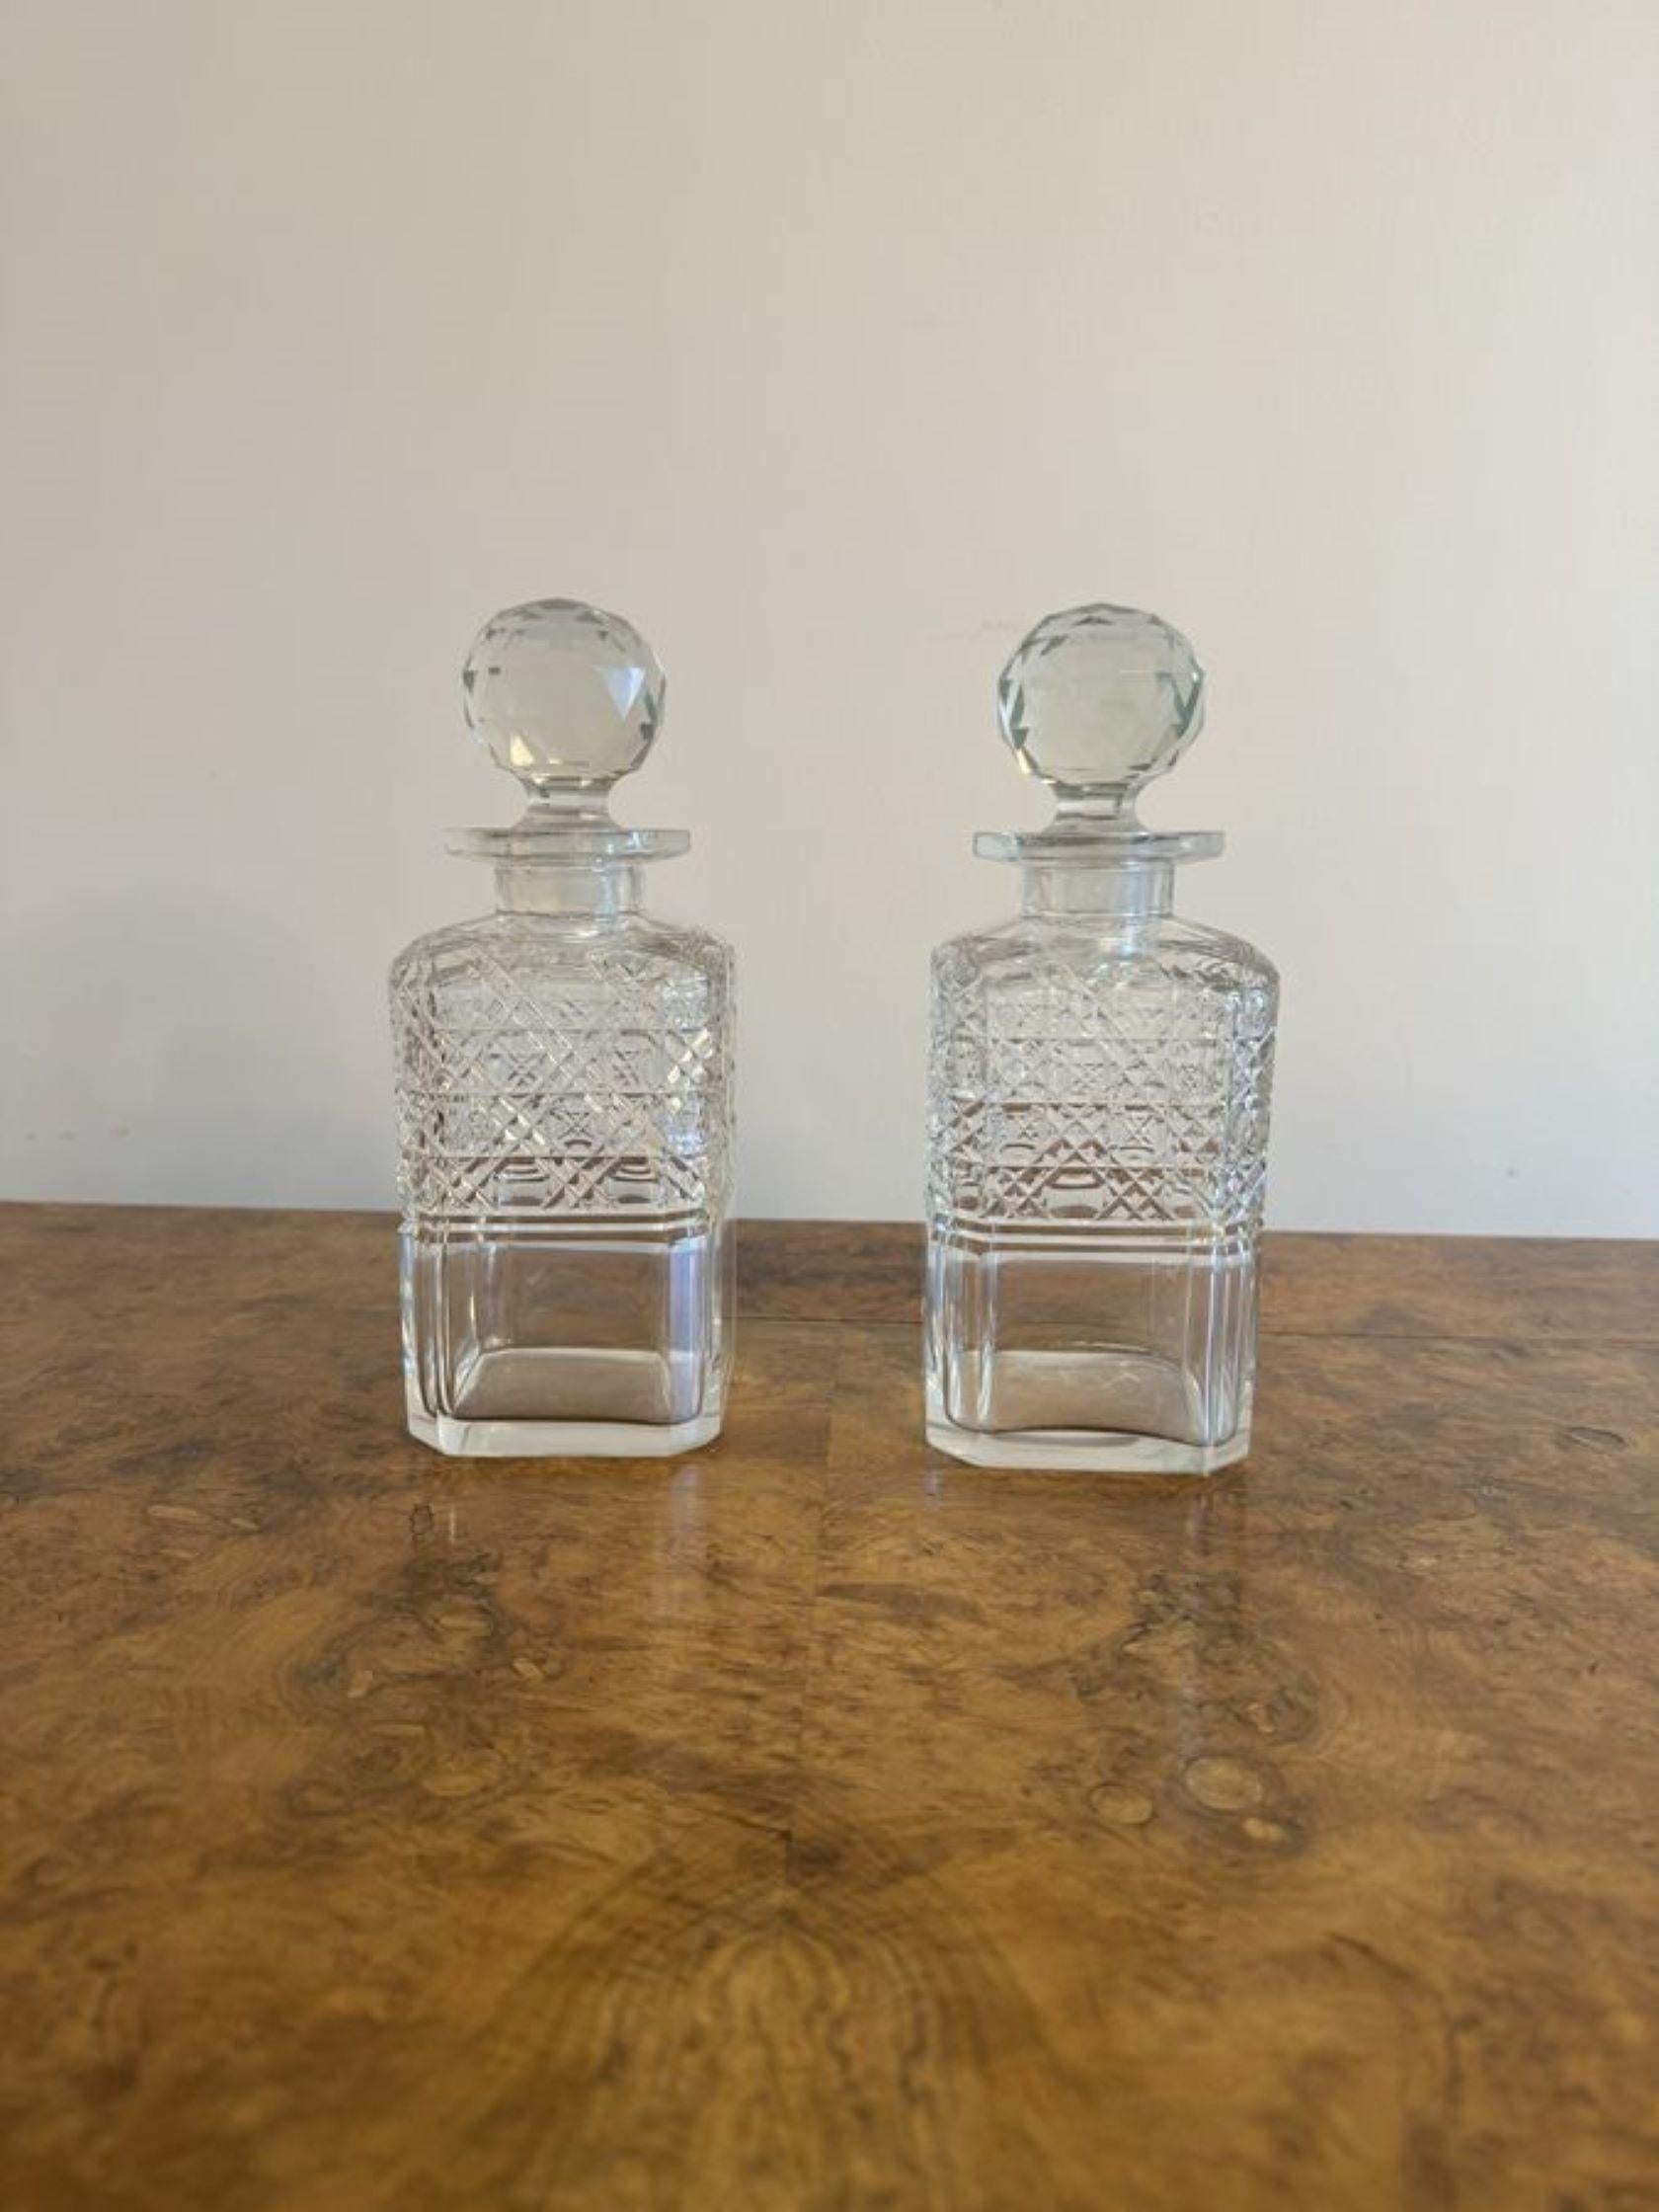 Quality pair of antique Victorian cut glass decanters having a quality pair of antique Victorian cut glass decanters with square shaped cut glass bodies and cut glass stoppers.

D. 1880